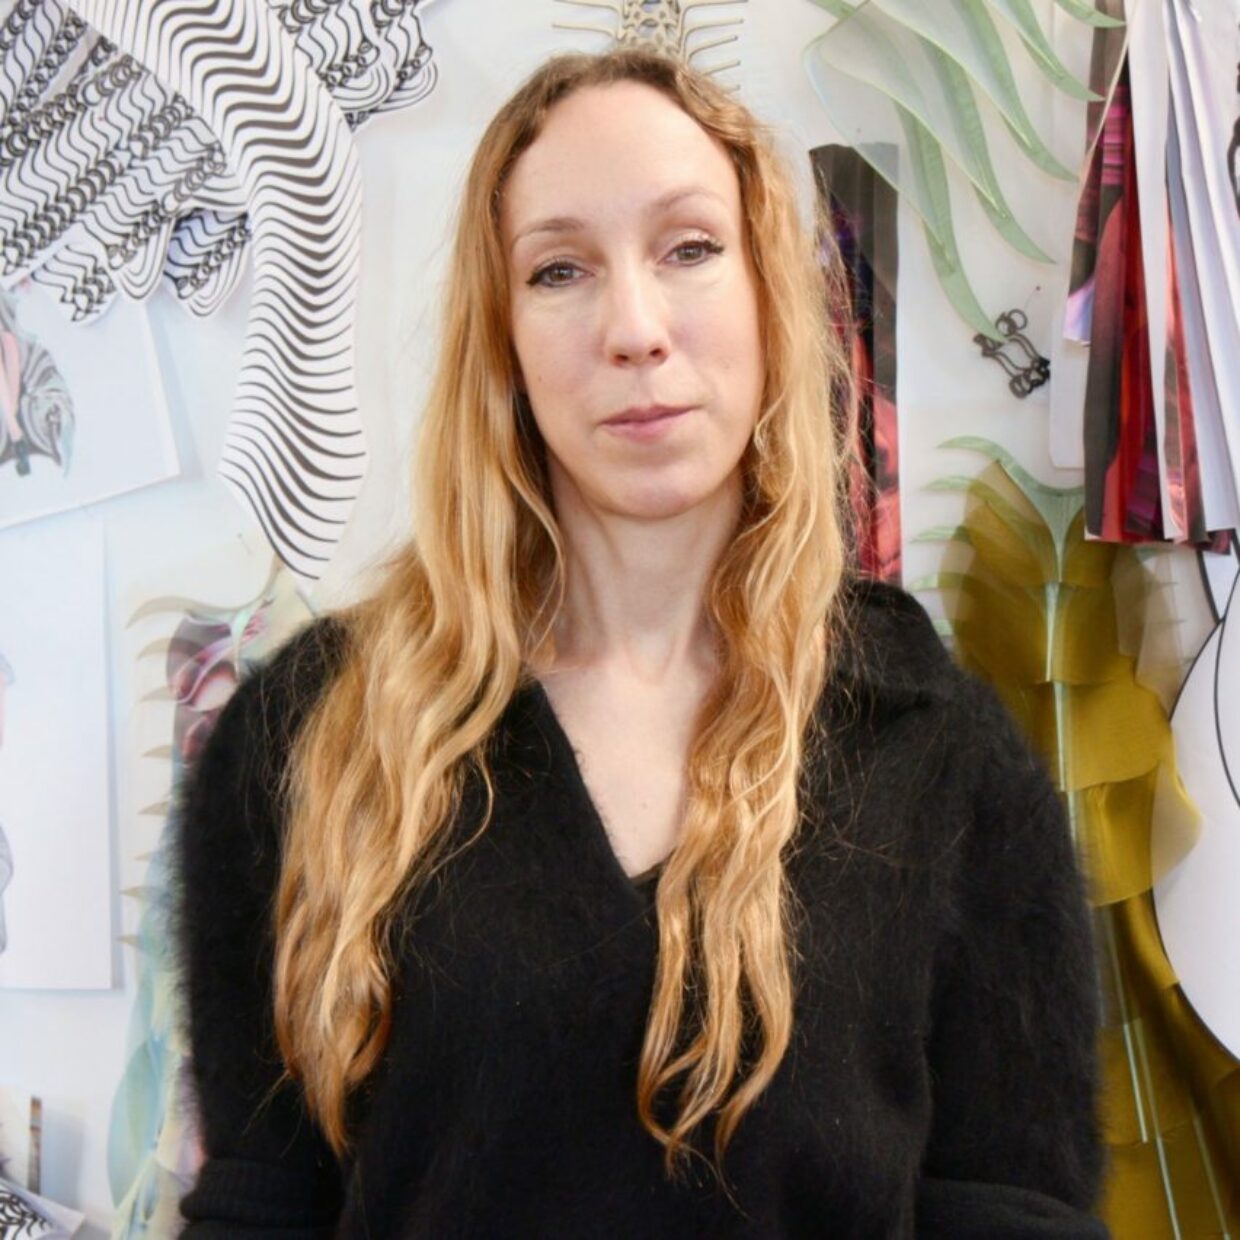 “There is so much in fashion that is unexplored” says Iris van Herpen in Dezeen’s exclusive video series | 1